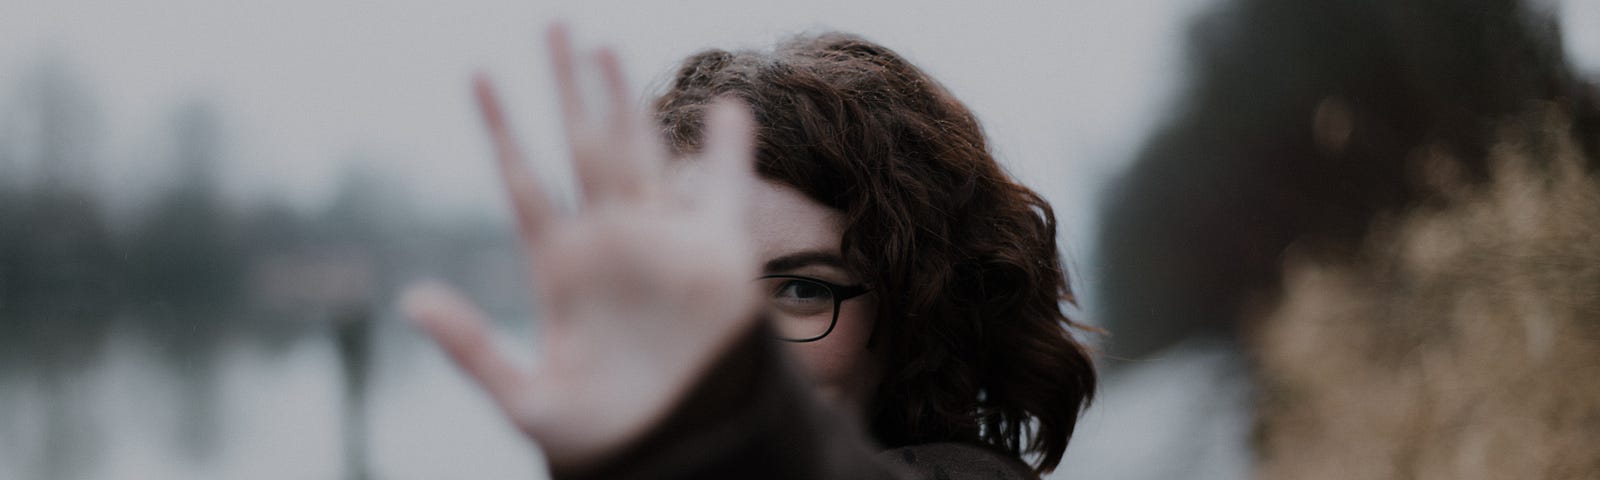 A woman signalling “stop” with her palm facing the camera